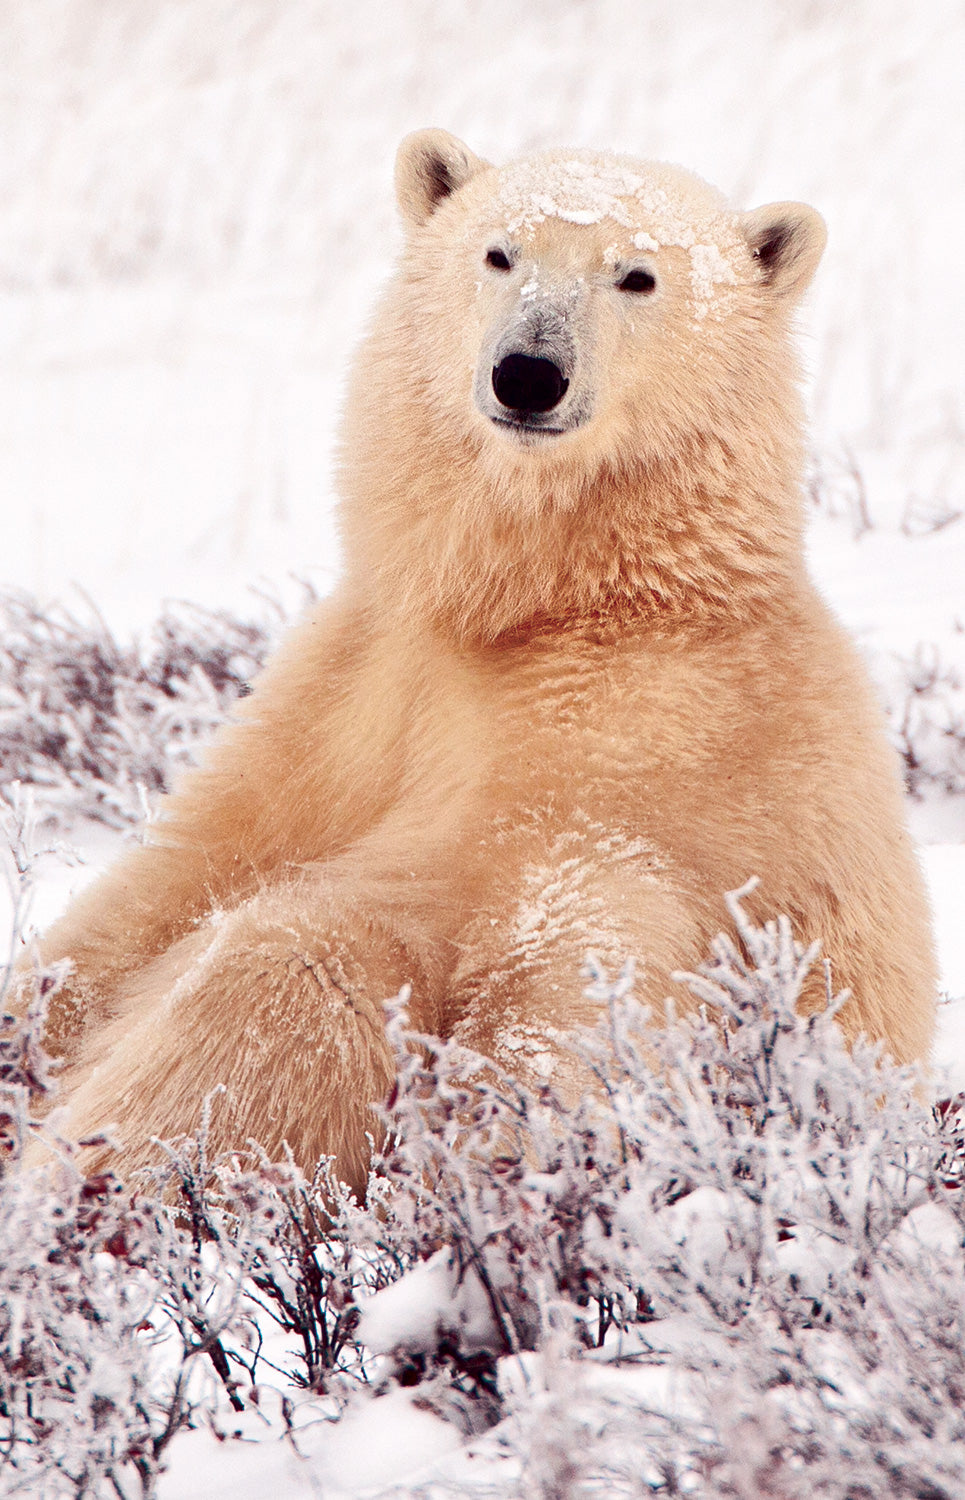 A photo of a polar bear lounging in the snow. End of image description.